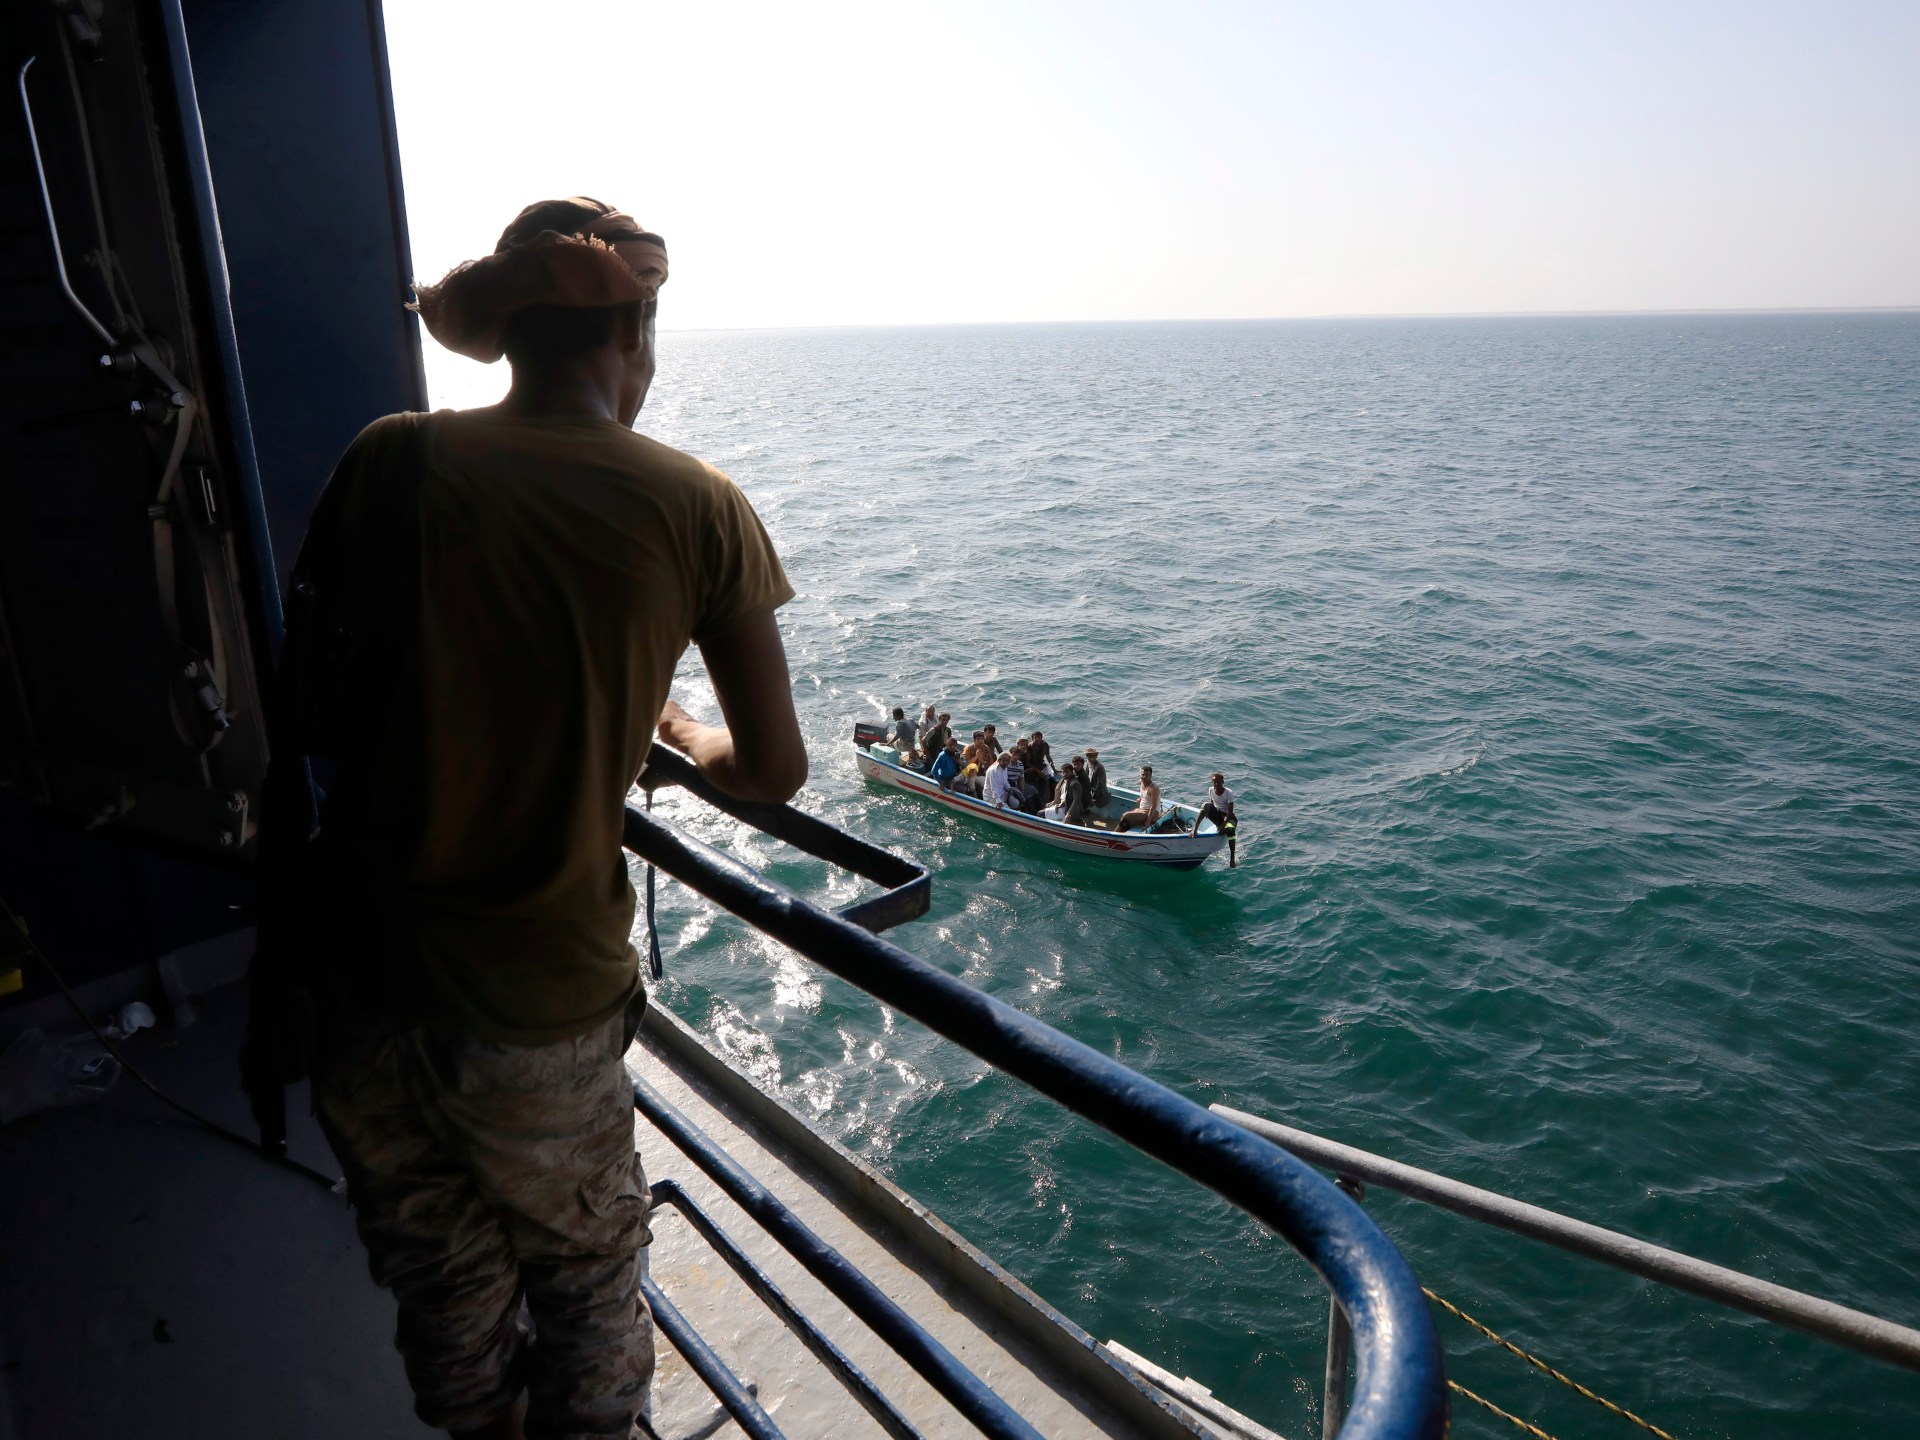 Missiles from Houthi-controlled Yemen target commercial tanker, report says | Israel-Palestine conflict News #Missiles #Houthicontrolled #Yemen #target #commercial #tanker #report #IsraelPalestine #conflict #News